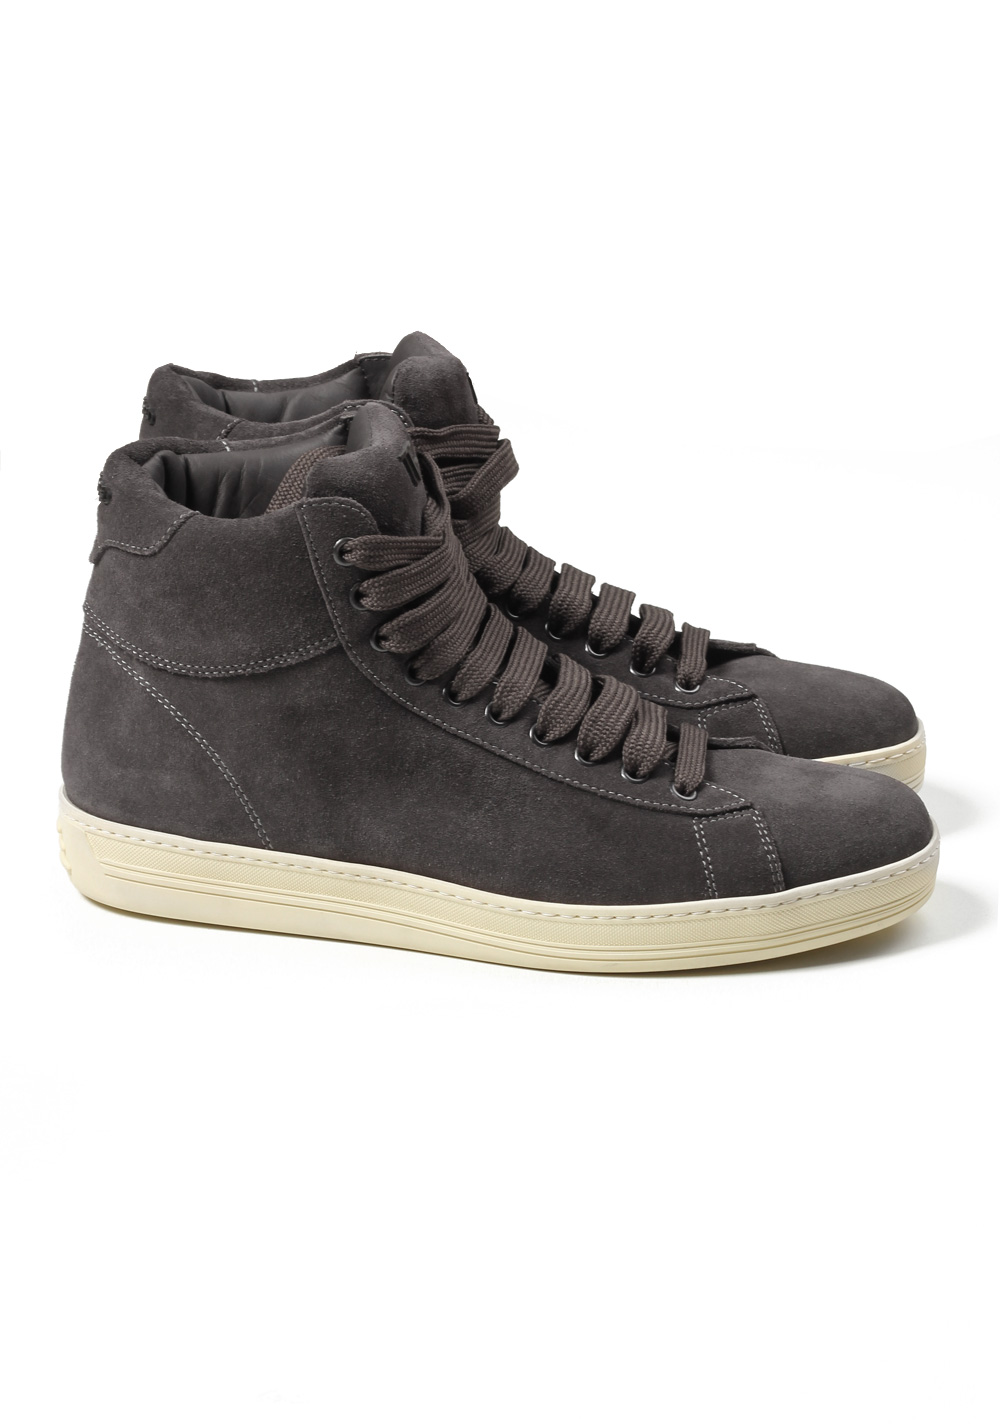 TOM FORD Russel High Top Gray Suede Sneaker Shoes Size 7.5 UK / 8.5 U.S. | Costume Limité